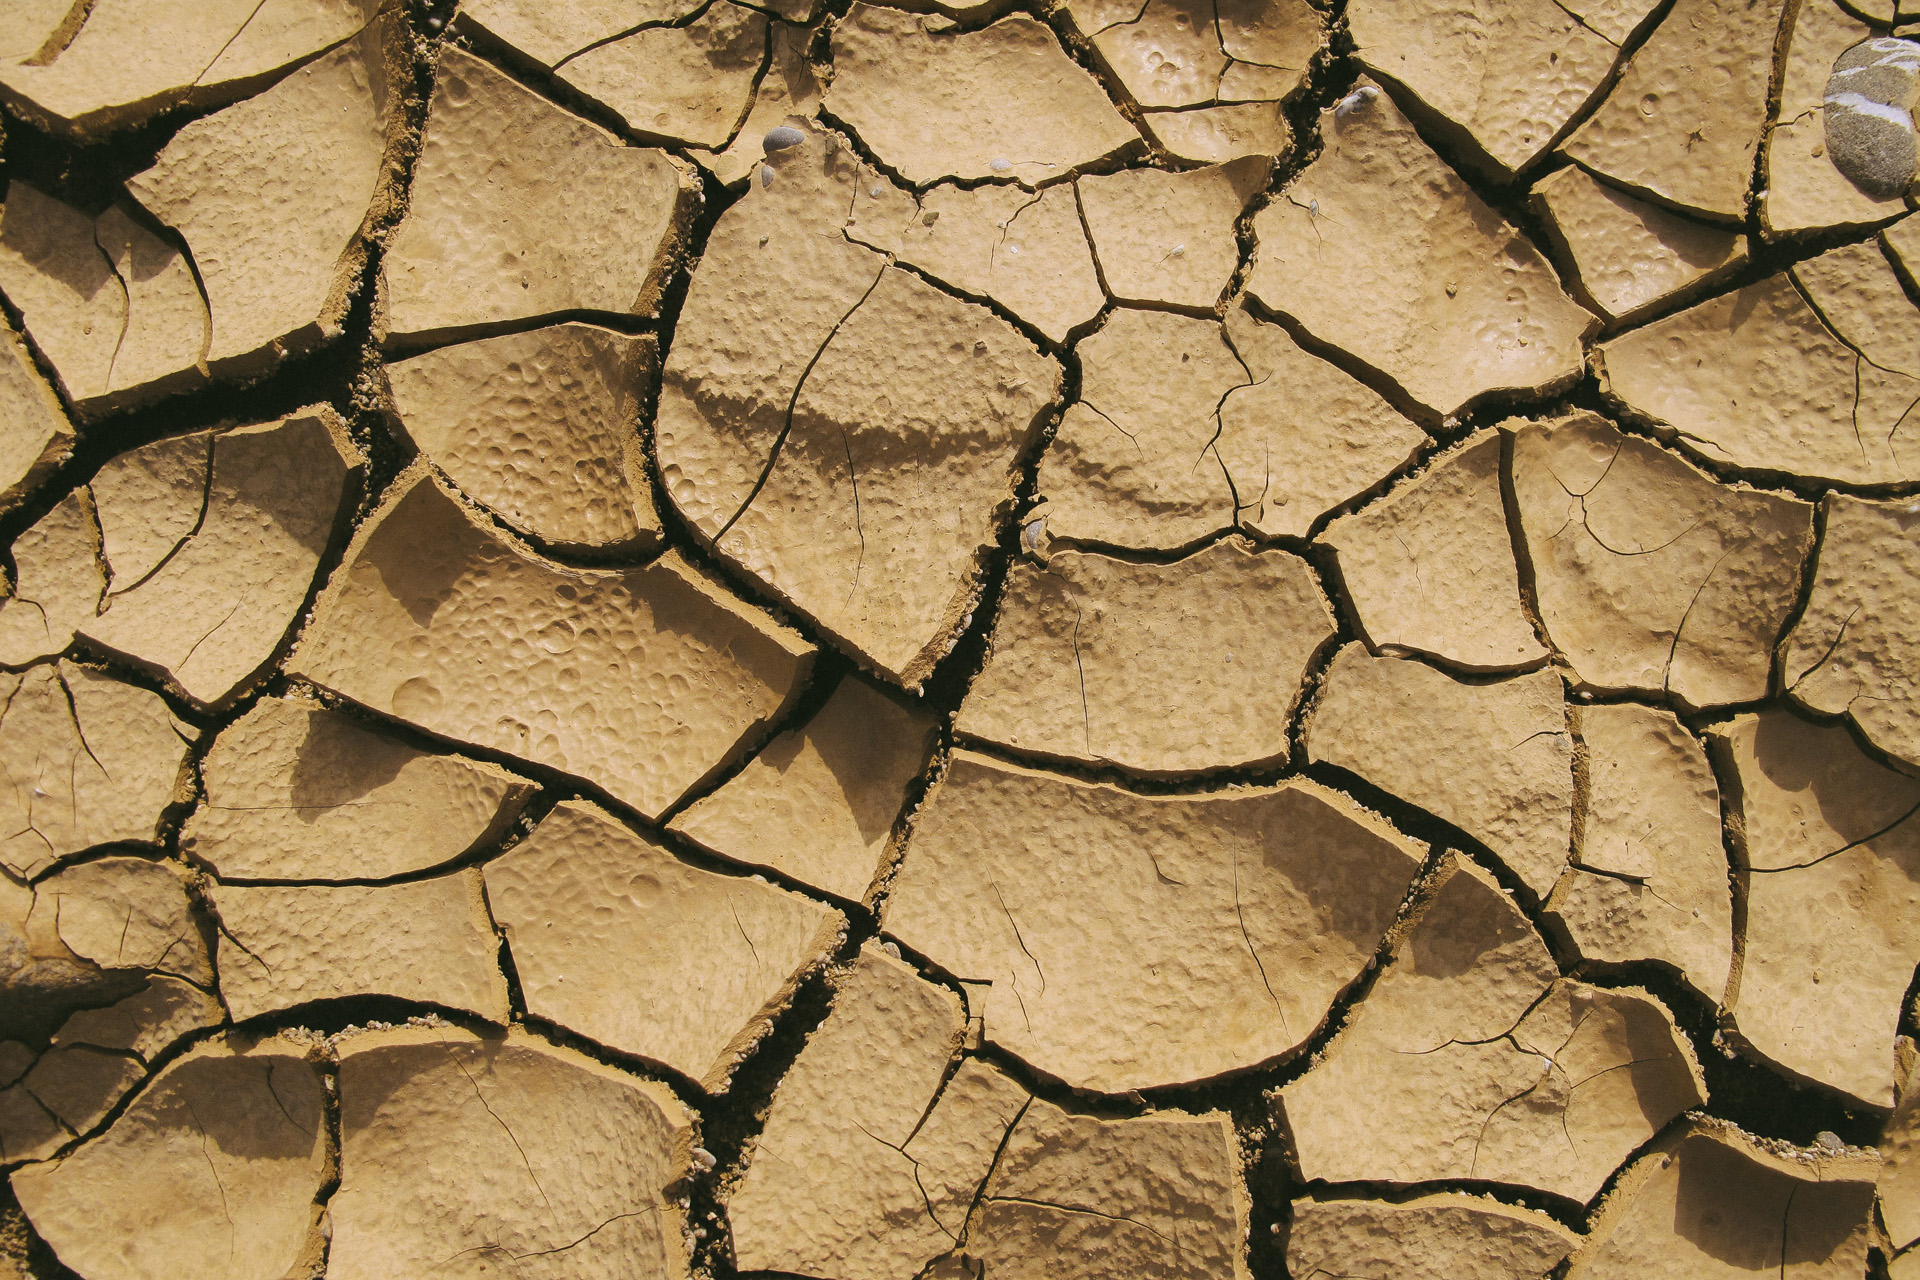 Drought is affecting travel and ecotourism